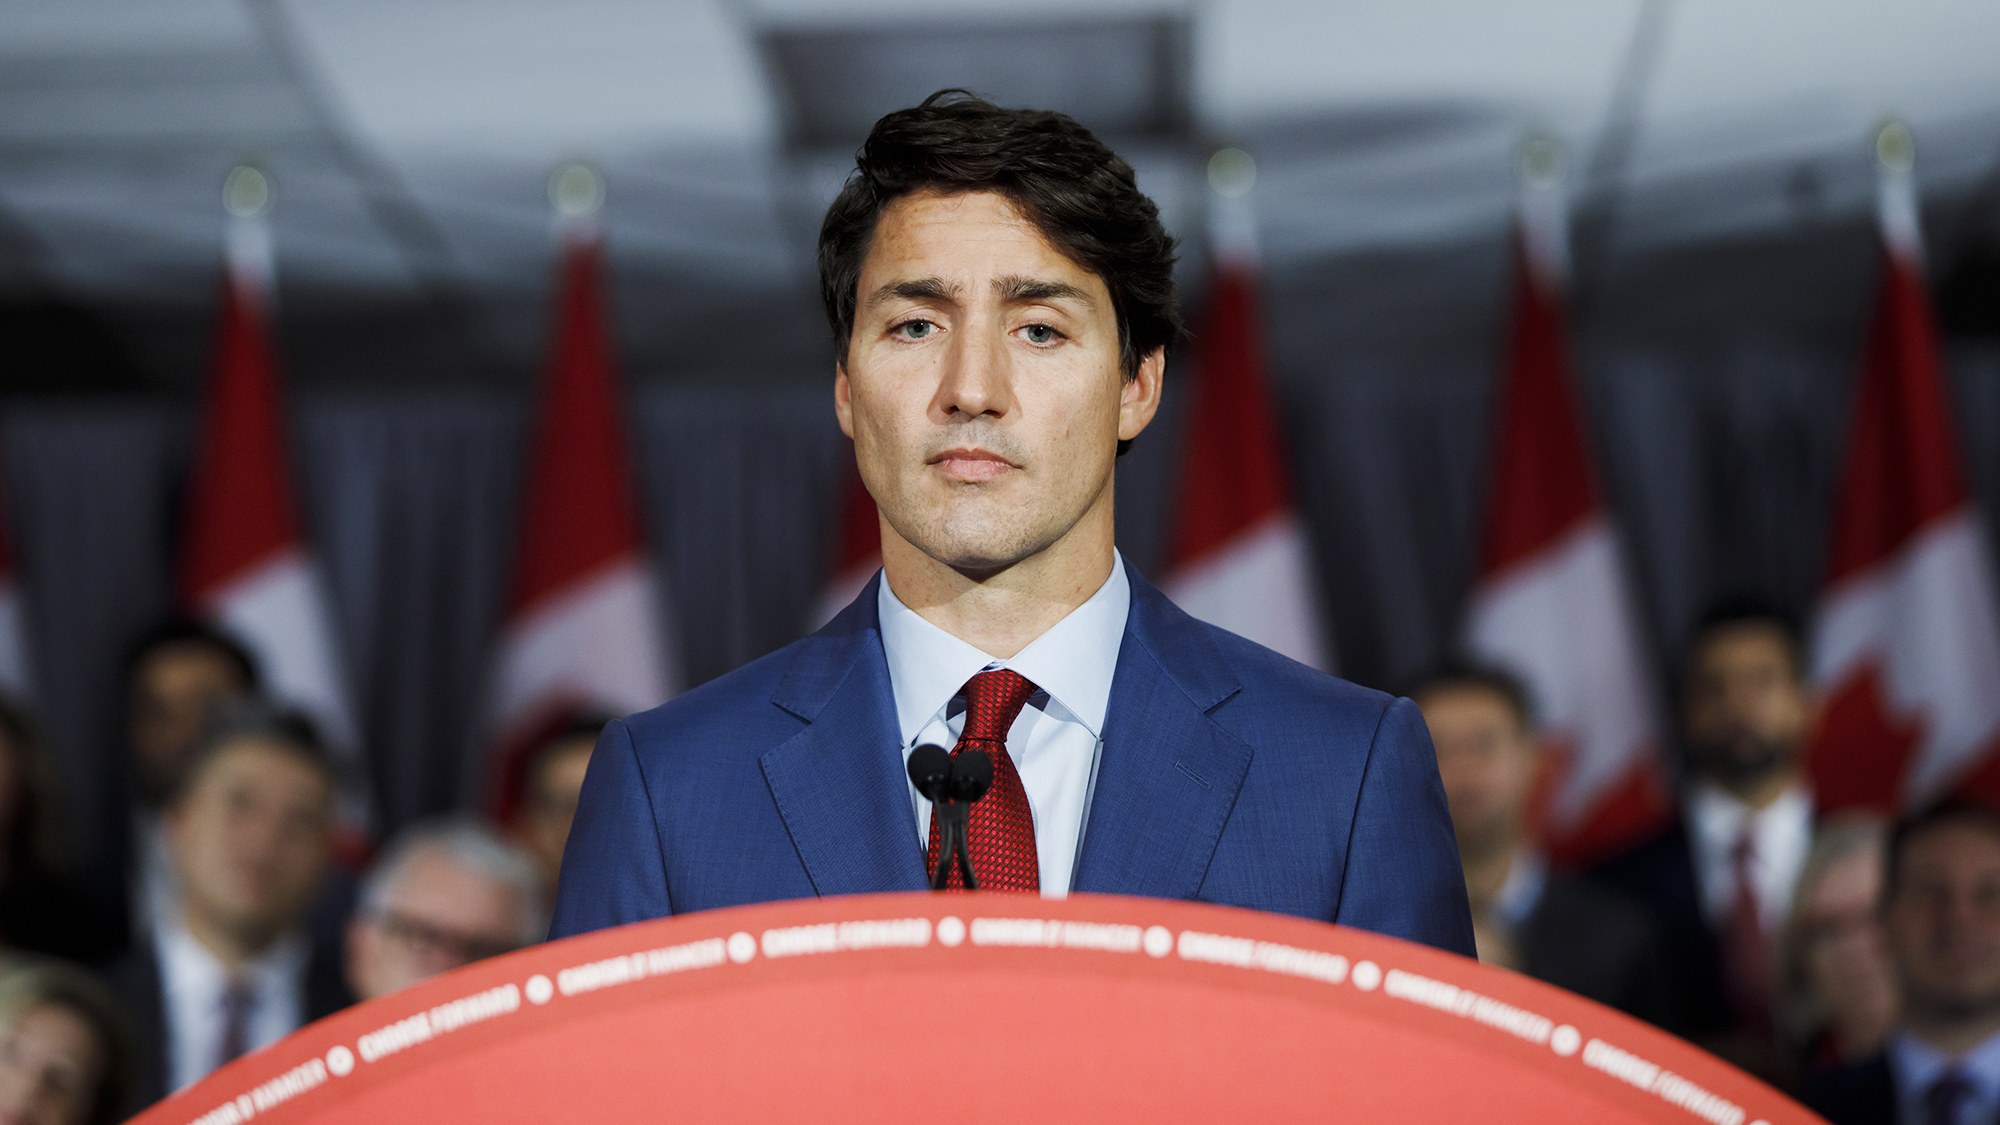 OPINION: WONDERING WHAT PIERRE TAUGHT JUSTIN TRUDEAU | THEWILL